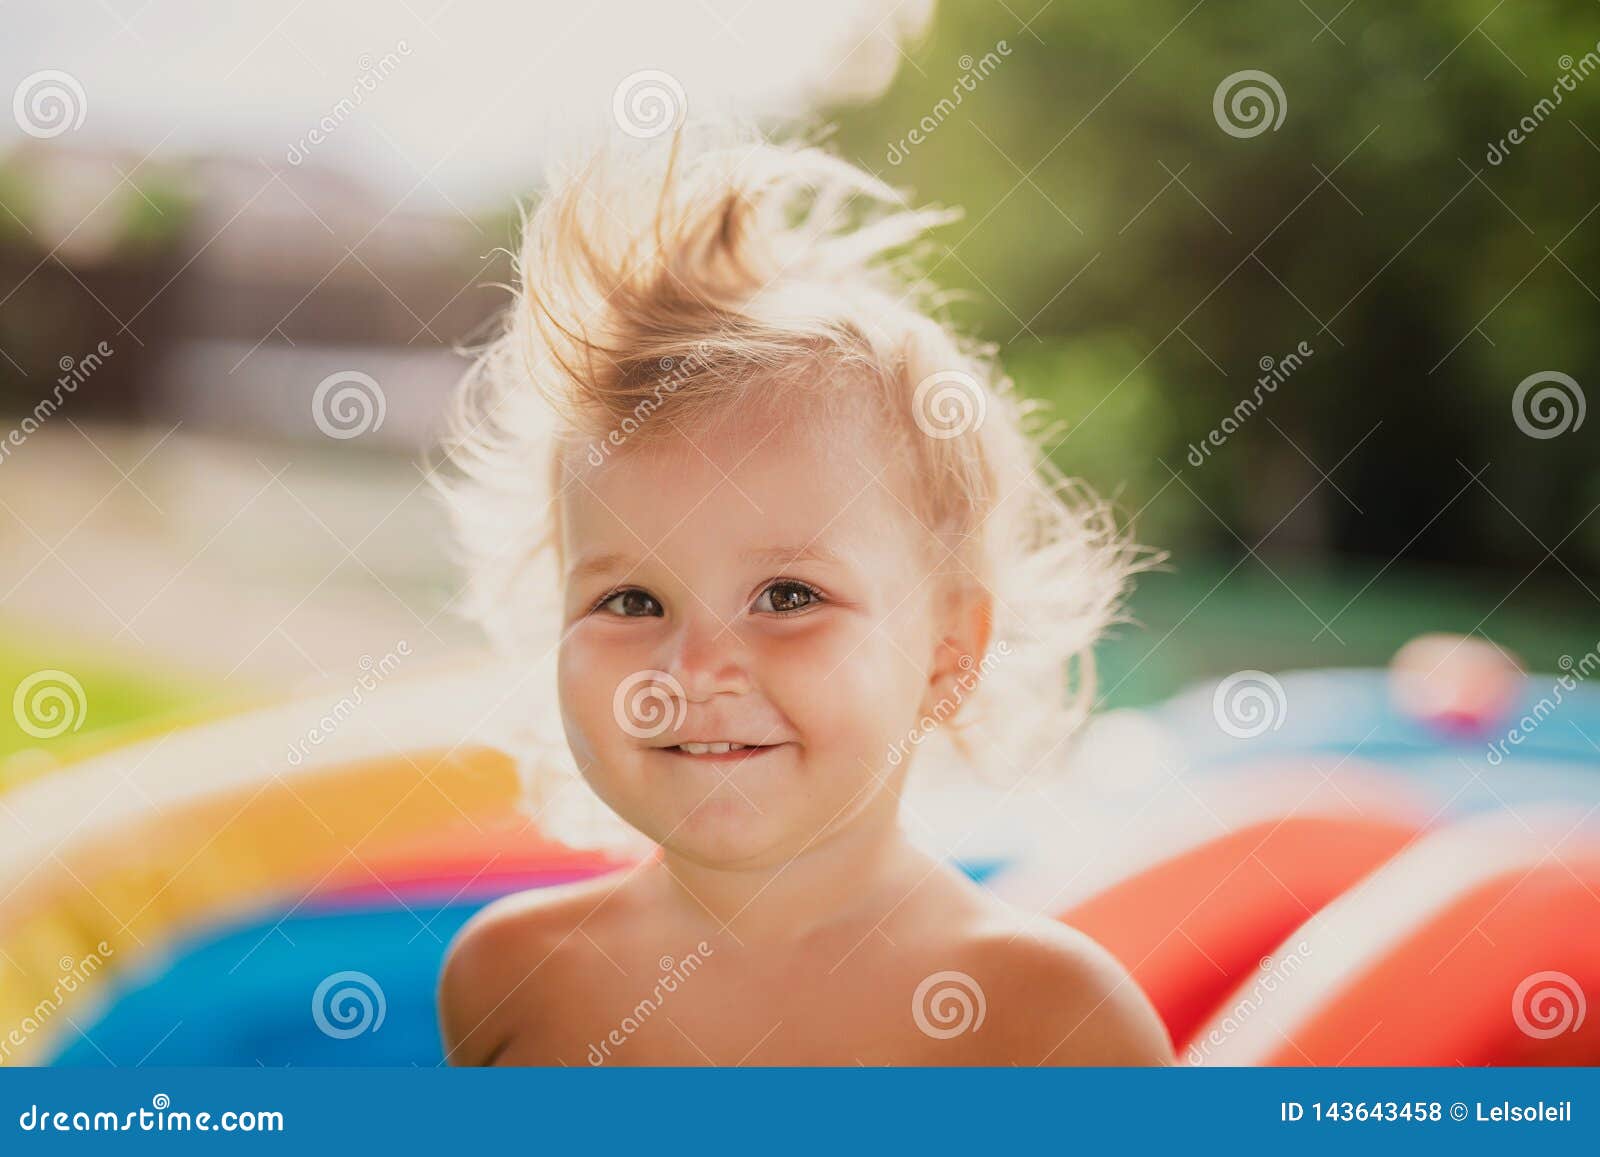 Cute Baby Girl with Blonde Curly Hair Outdoors. Little Girl 1-2 Year Old  Stock Photo - Image of nature, hairstyle: 143643458